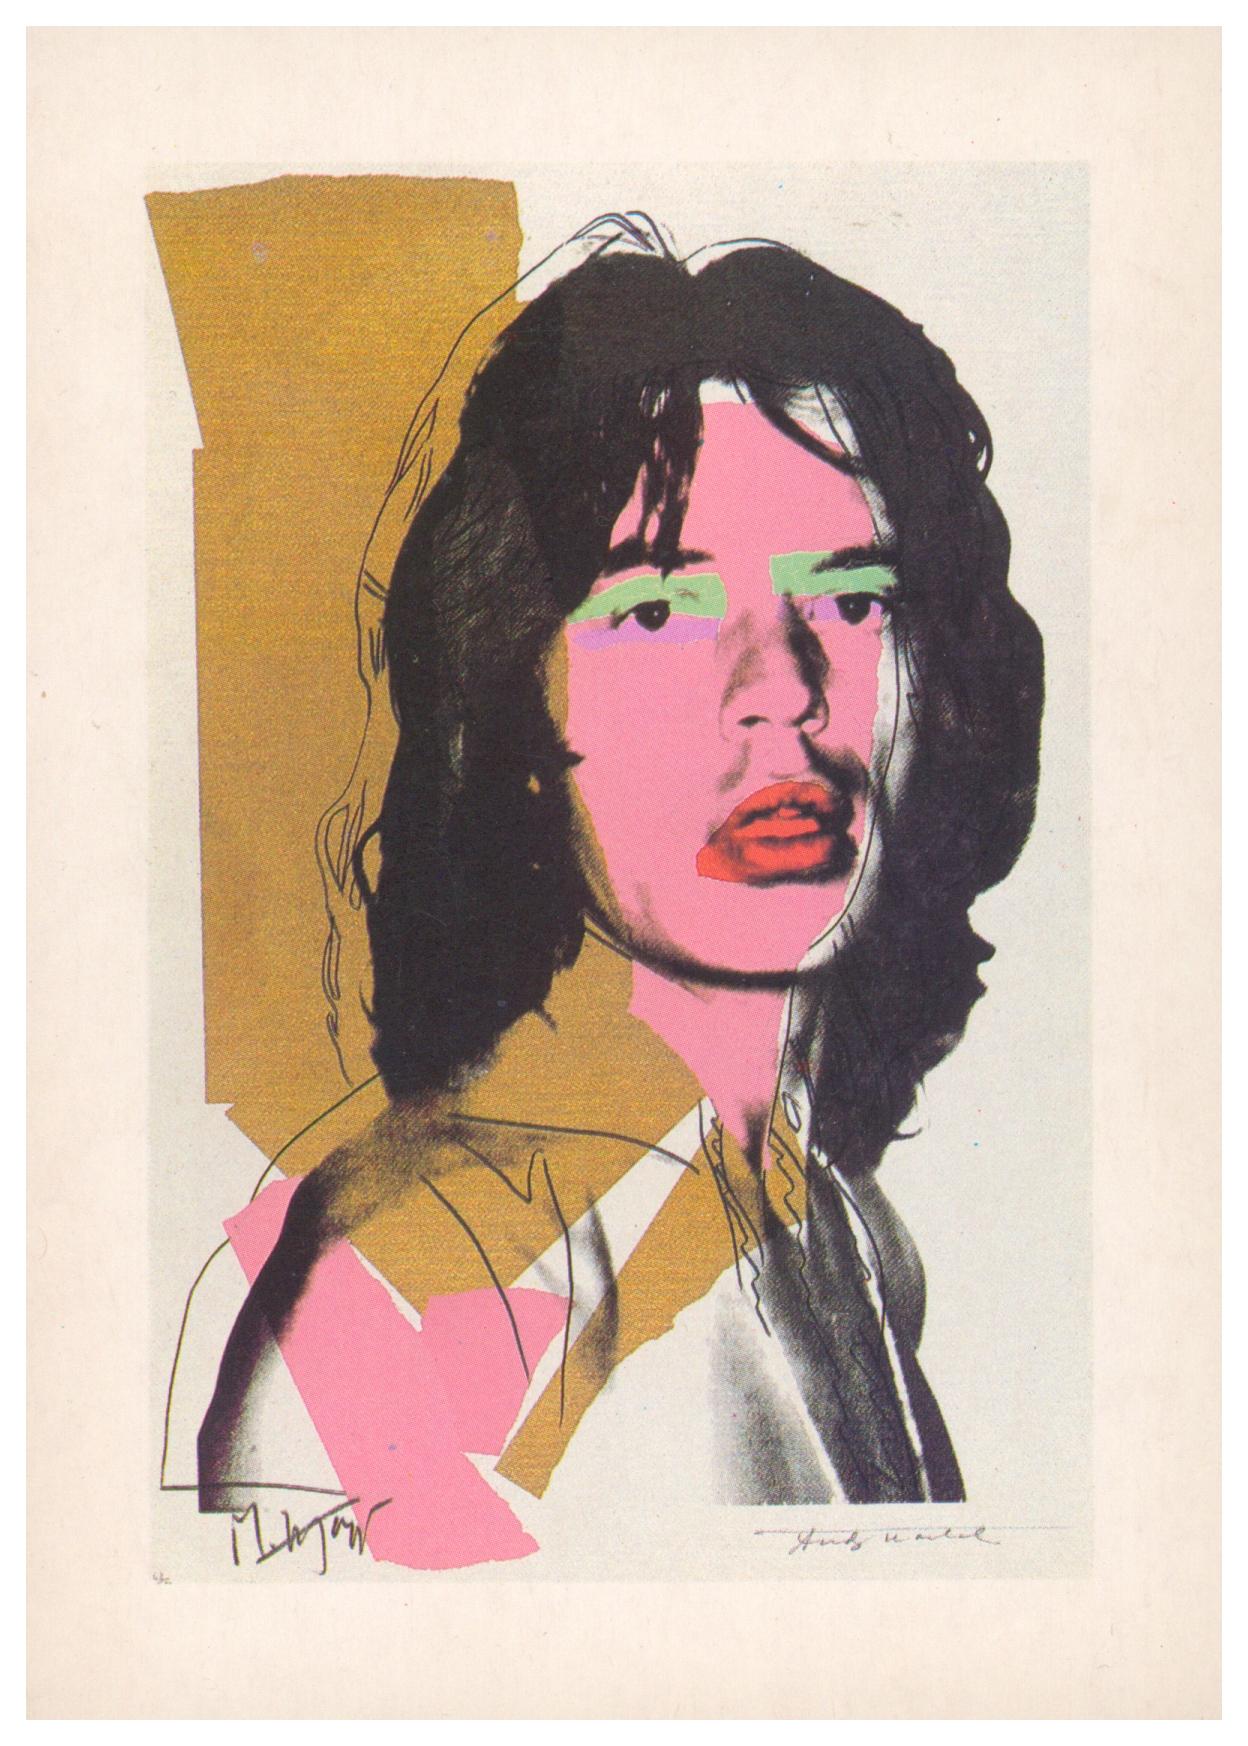 Andy Warhol Portrait screen-prints 1965-80 (announcement cards)